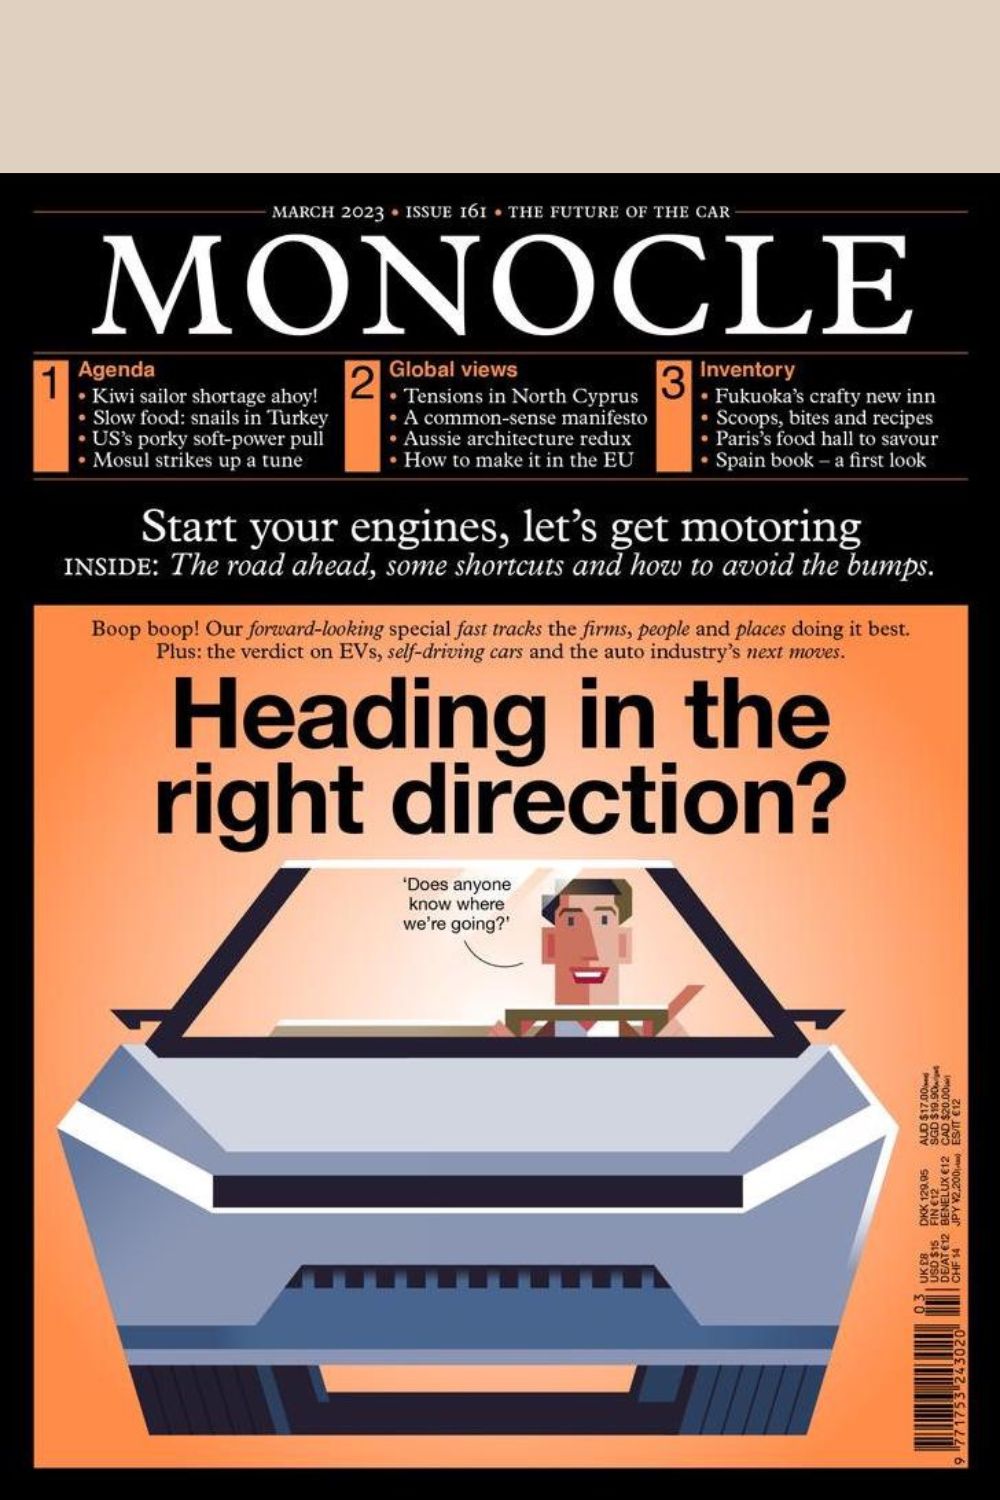 Monocle Magazine Issue 161 March 2023